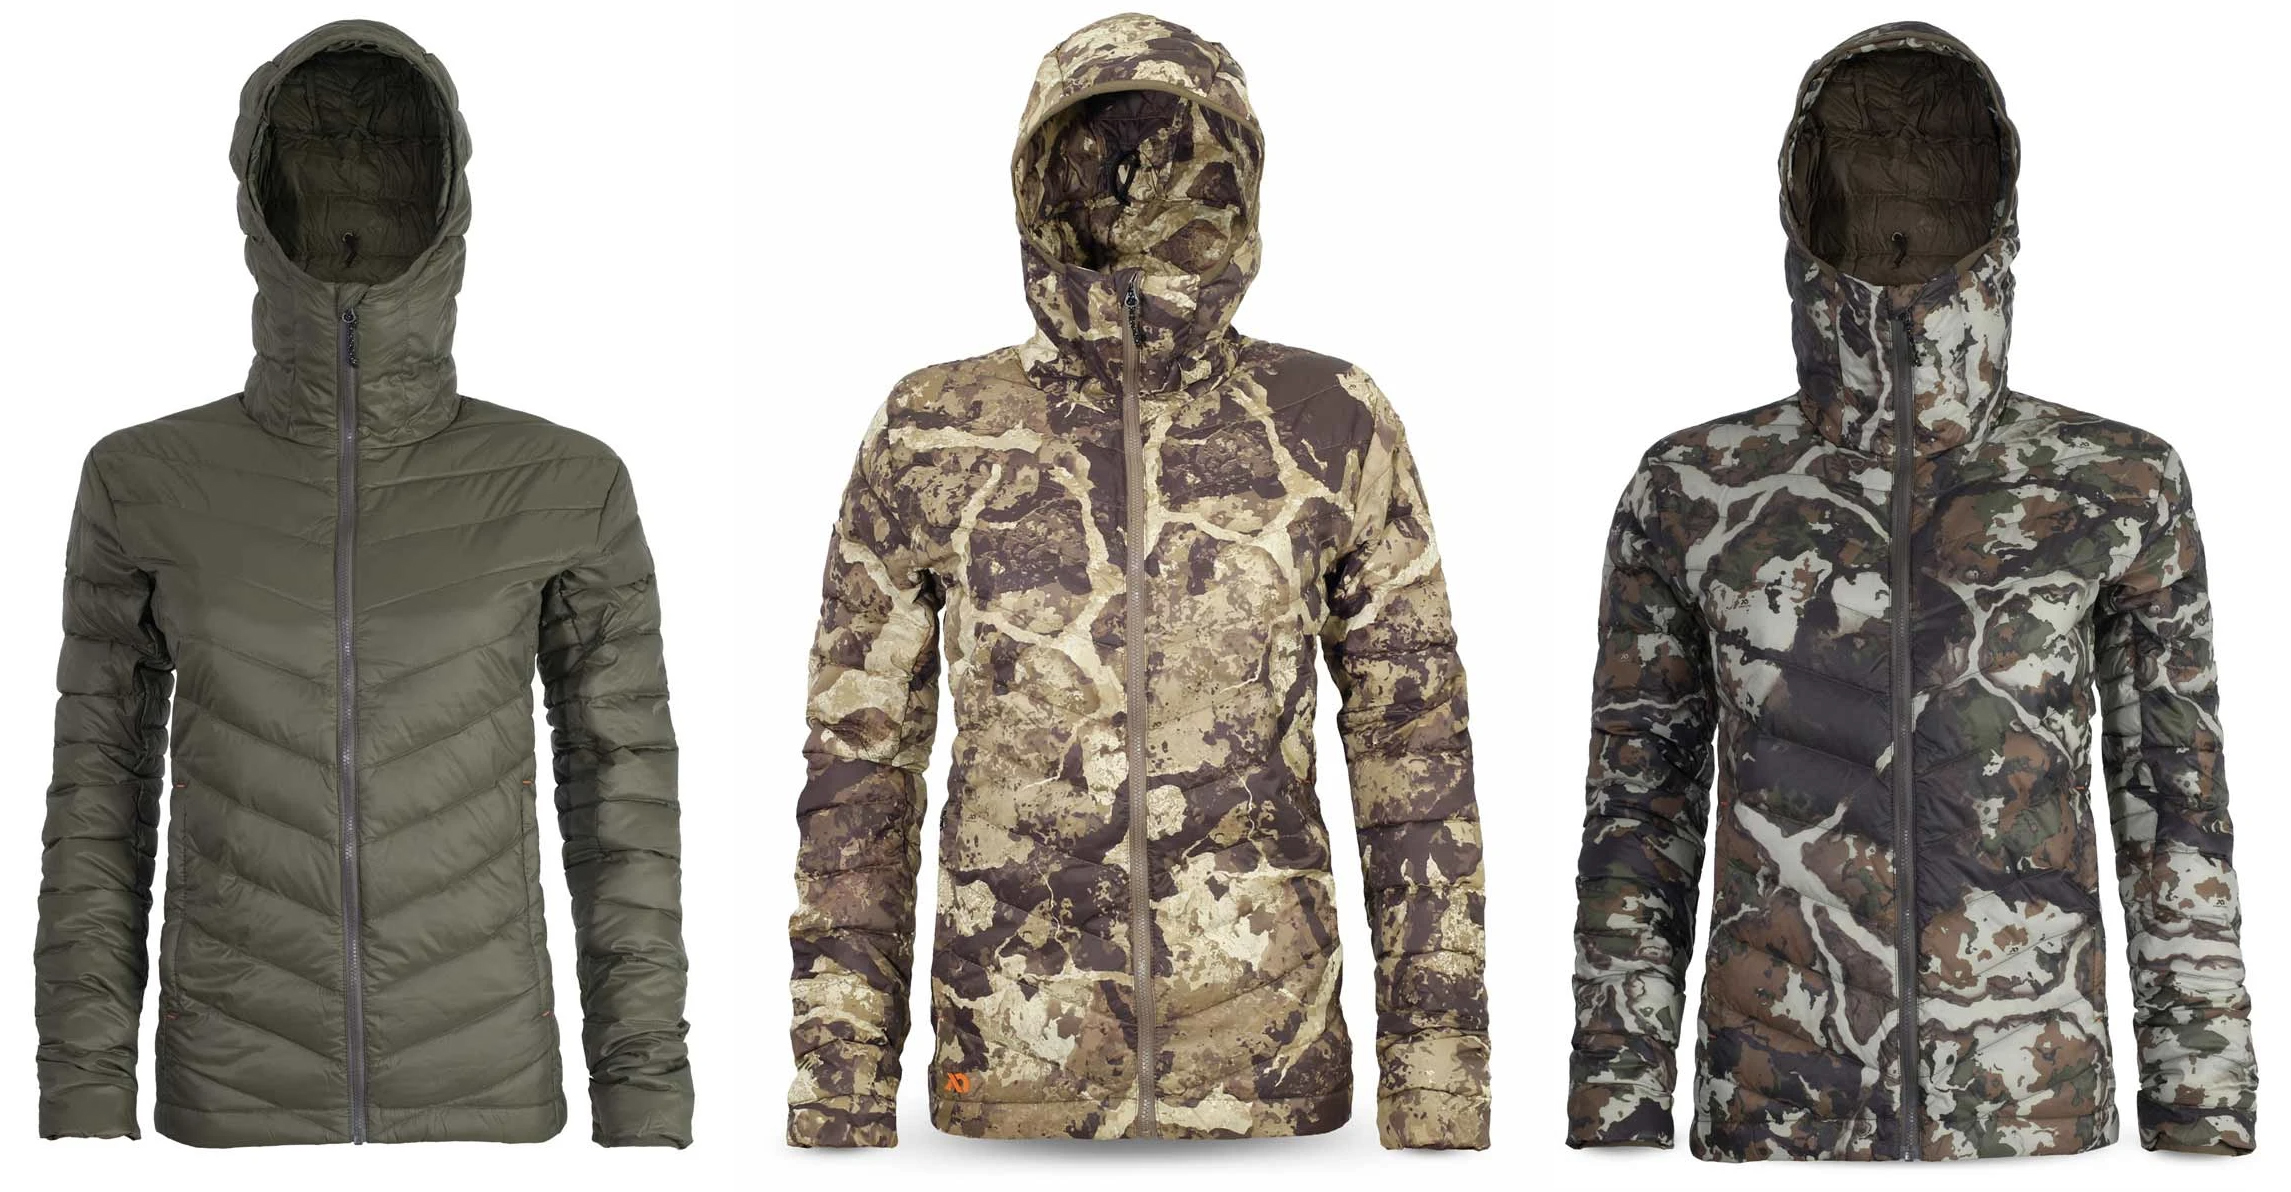 Three camo and green puffy jackets with hoods on a white background.